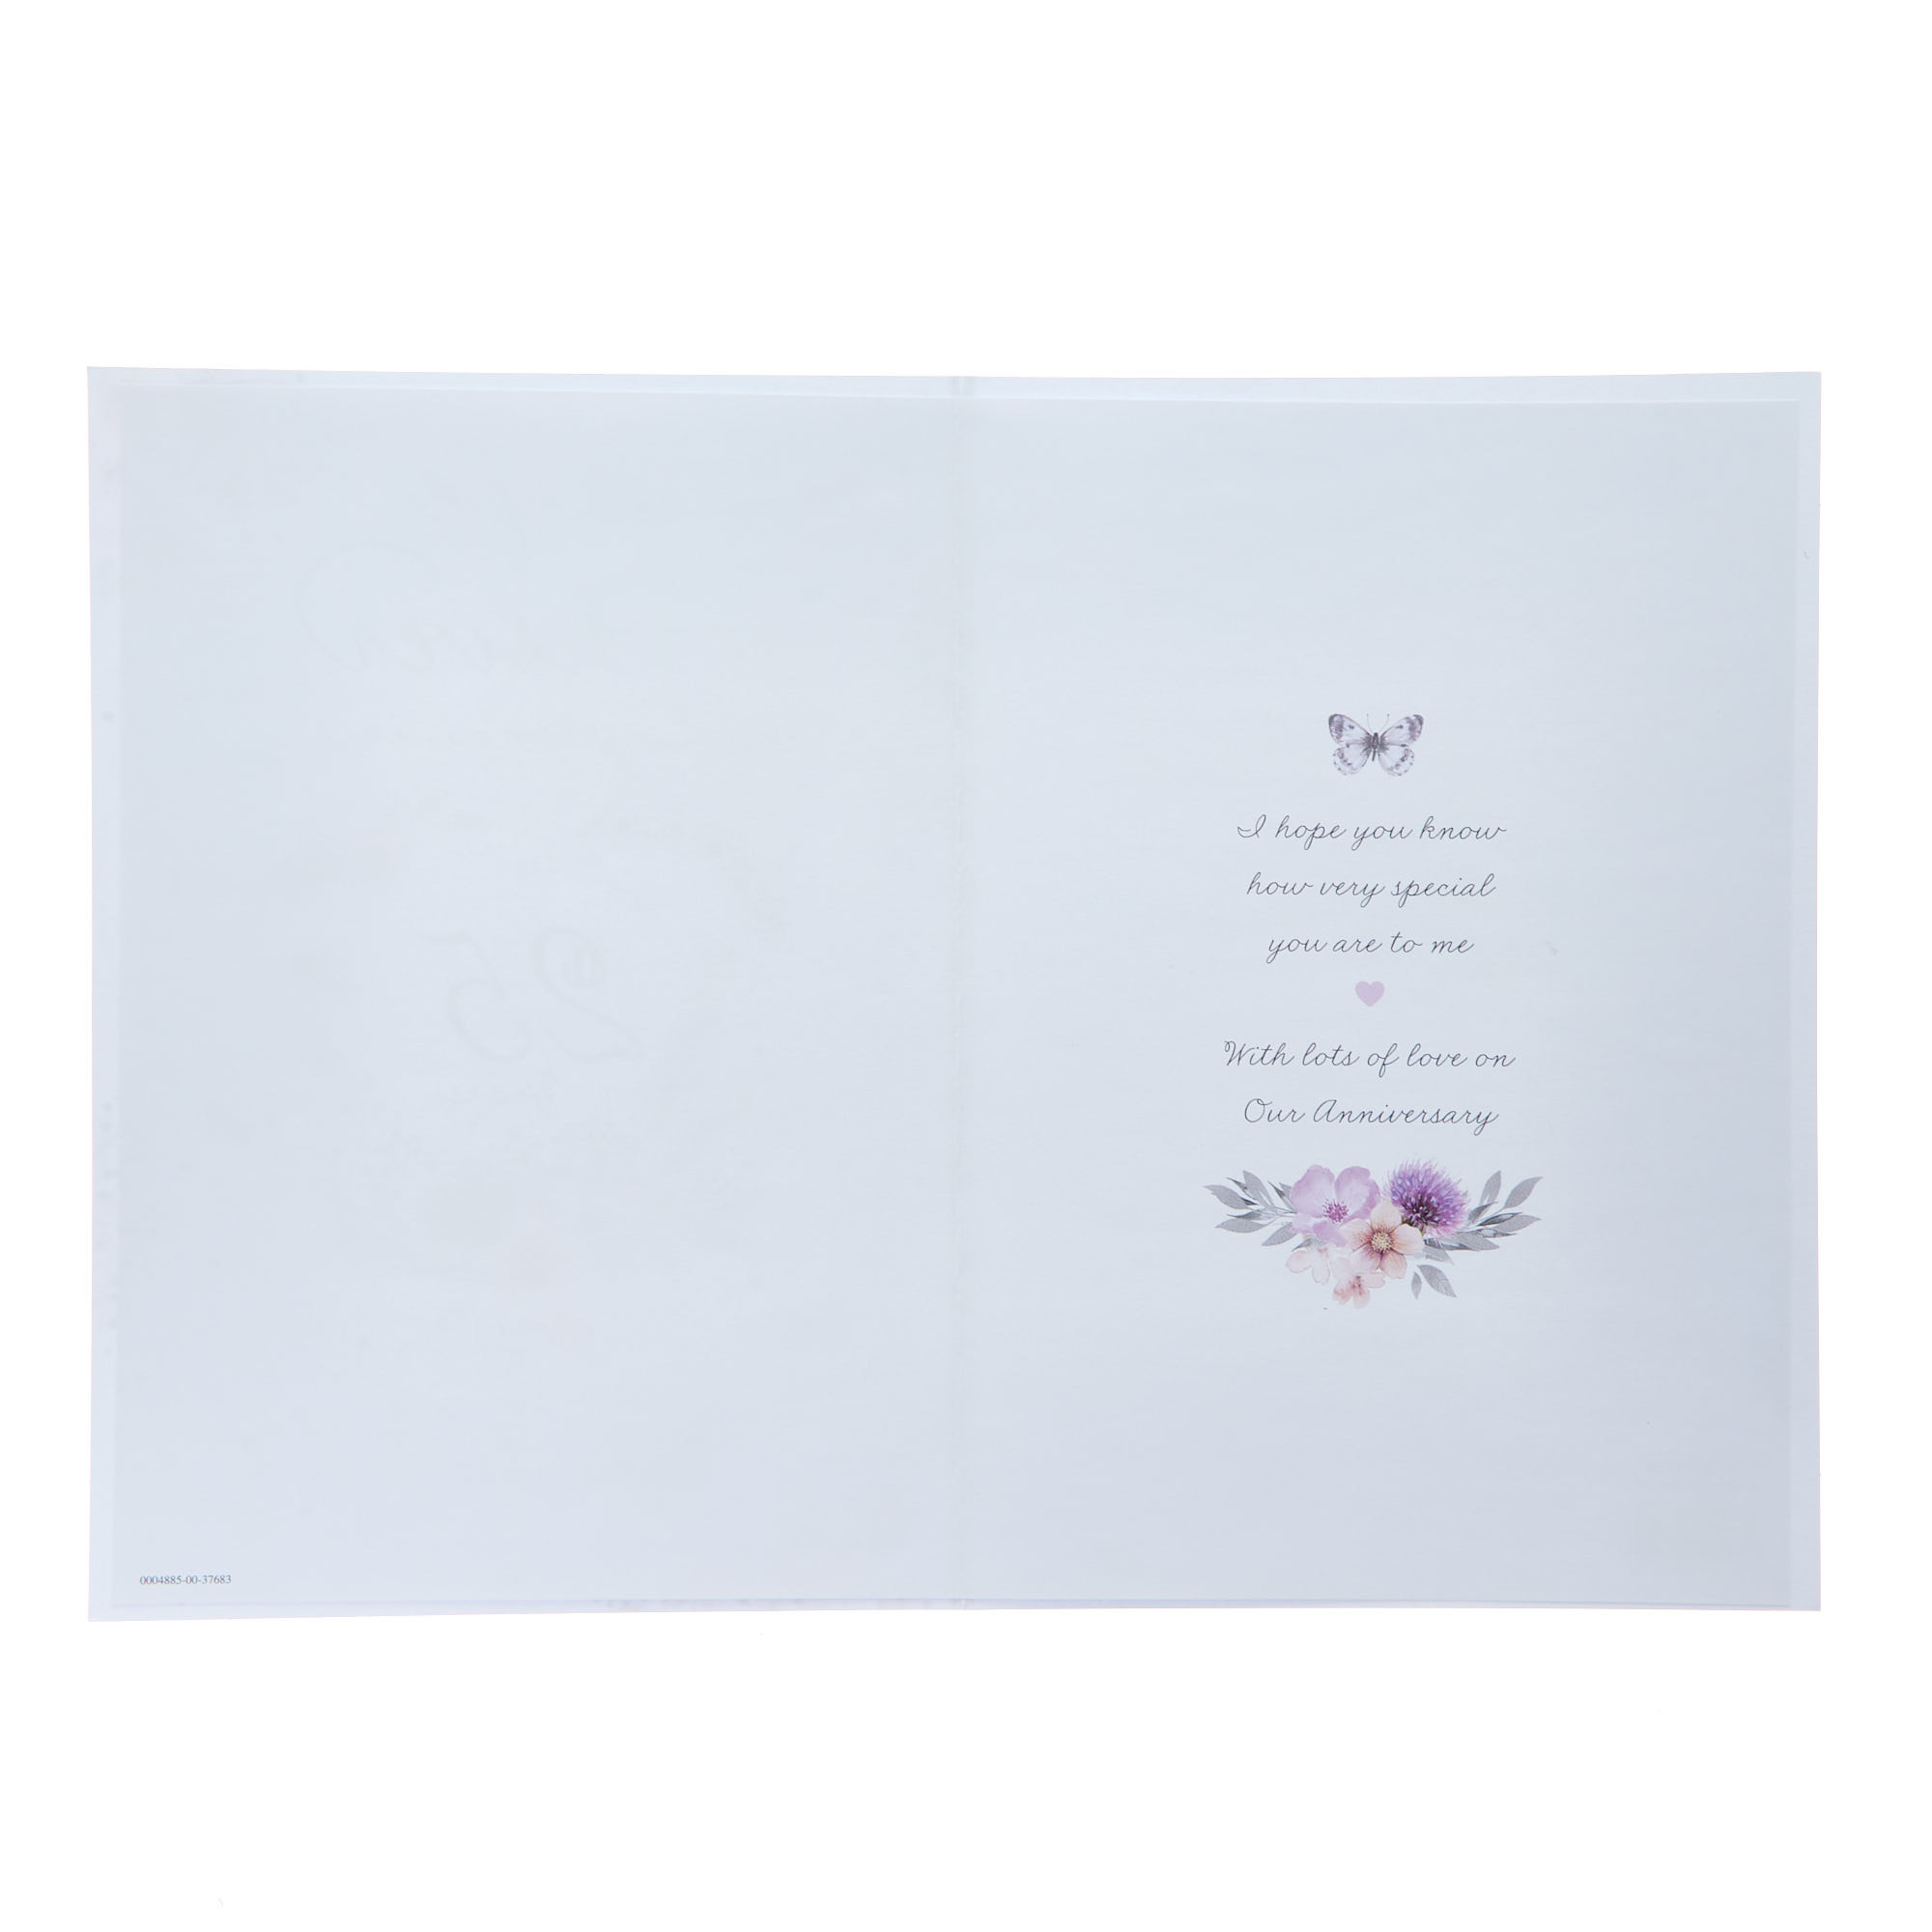 Wife Floral Silver 25th Wedding Anniversary Cards